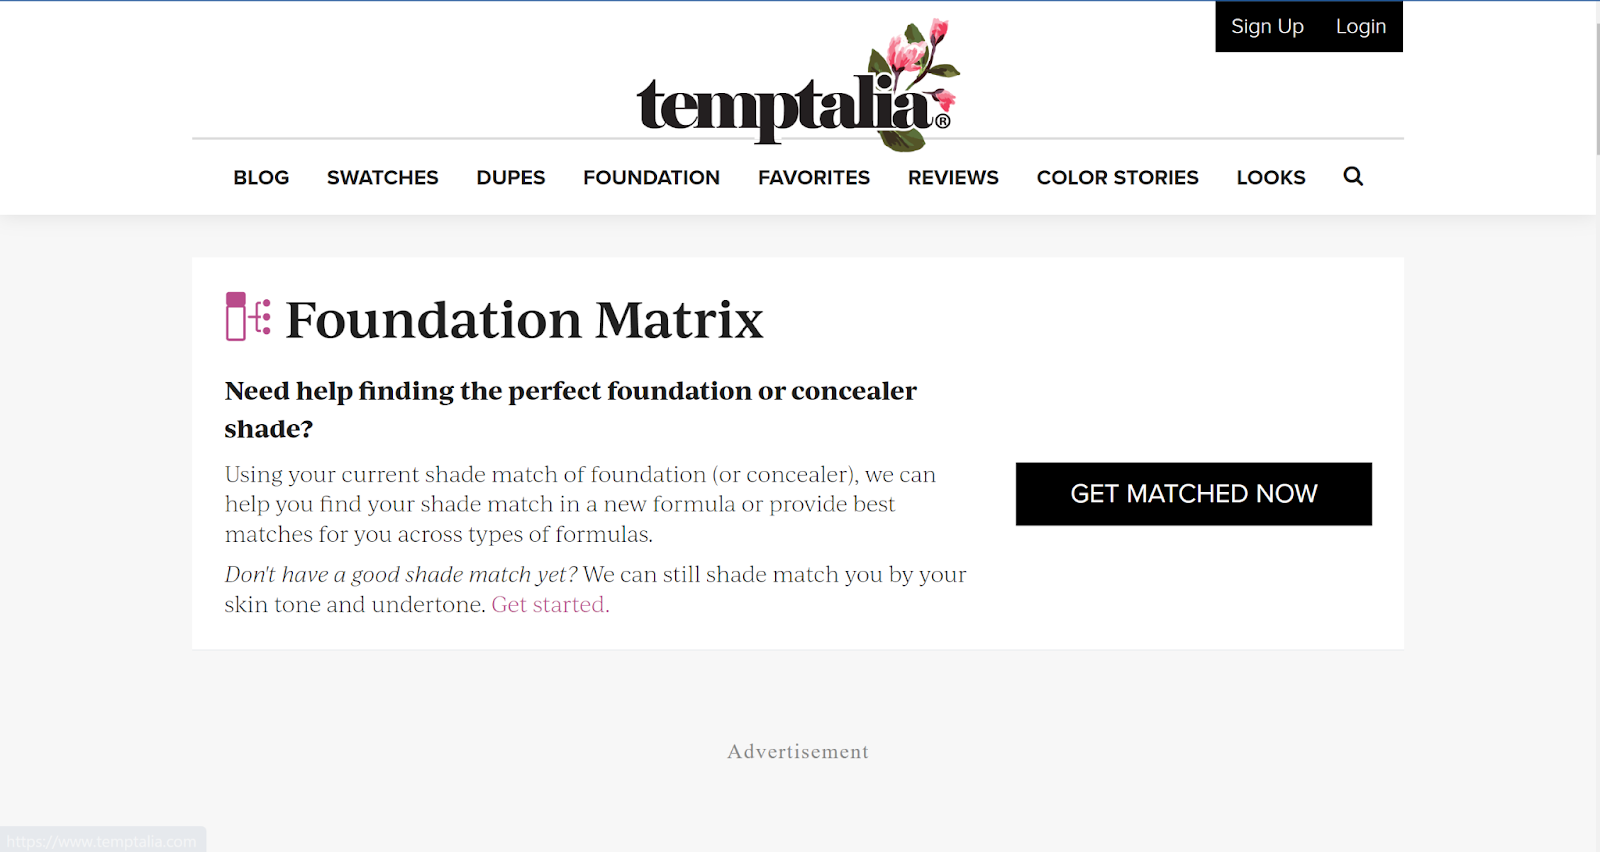 Temptalia features content for beauty tips, swatches and reviews.